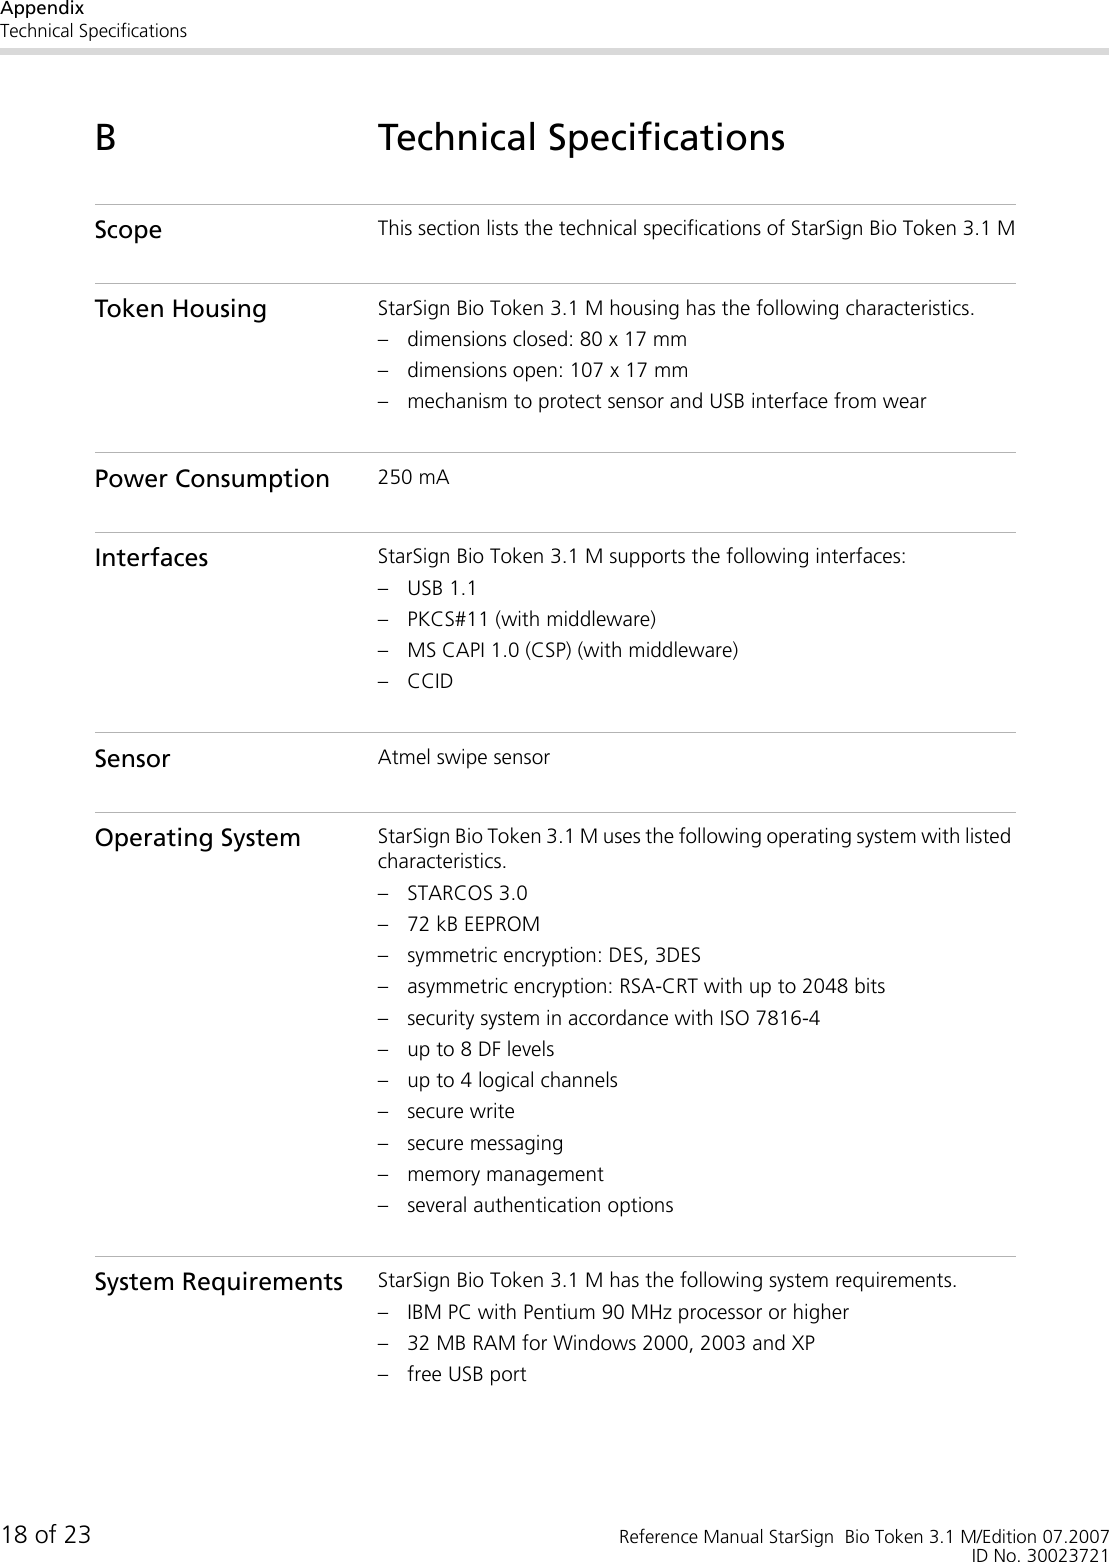 AppendixTechnical Specifications18 of 23 Reference Manual StarSign  Bio Token 3.1 M/Edition 07.2007ID No. 30023721B Technical SpecificationsScope This section lists the technical specifications of StarSign Bio Token 3.1 MToken Housing StarSign Bio Token 3.1 M housing has the following characteristics.– dimensions closed: 80 x 17 mm– dimensions open: 107 x 17 mm– mechanism to protect sensor and USB interface from wearPower Consumption 250 mAInterfaces StarSign Bio Token 3.1 M supports the following interfaces:– USB 1.1– PKCS#11 (with middleware)– MS CAPI 1.0 (CSP) (with middleware)– CCIDSensor Atmel swipe sensorOperating System StarSign Bio Token 3.1 M uses the following operating system with listed characteristics.– STARCOS 3.0– 72 kB EEPROM– symmetric encryption: DES, 3DES– asymmetric encryption: RSA-CRT with up to 2048 bits– security system in accordance with ISO 7816-4– up to 8 DF levels– up to 4 logical channels– secure write– secure messaging– memory management– several authentication optionsSystem Requirements StarSign Bio Token 3.1 M has the following system requirements.– IBM PC with Pentium 90 MHz processor or higher– 32 MB RAM for Windows 2000, 2003 and XP– free USB port